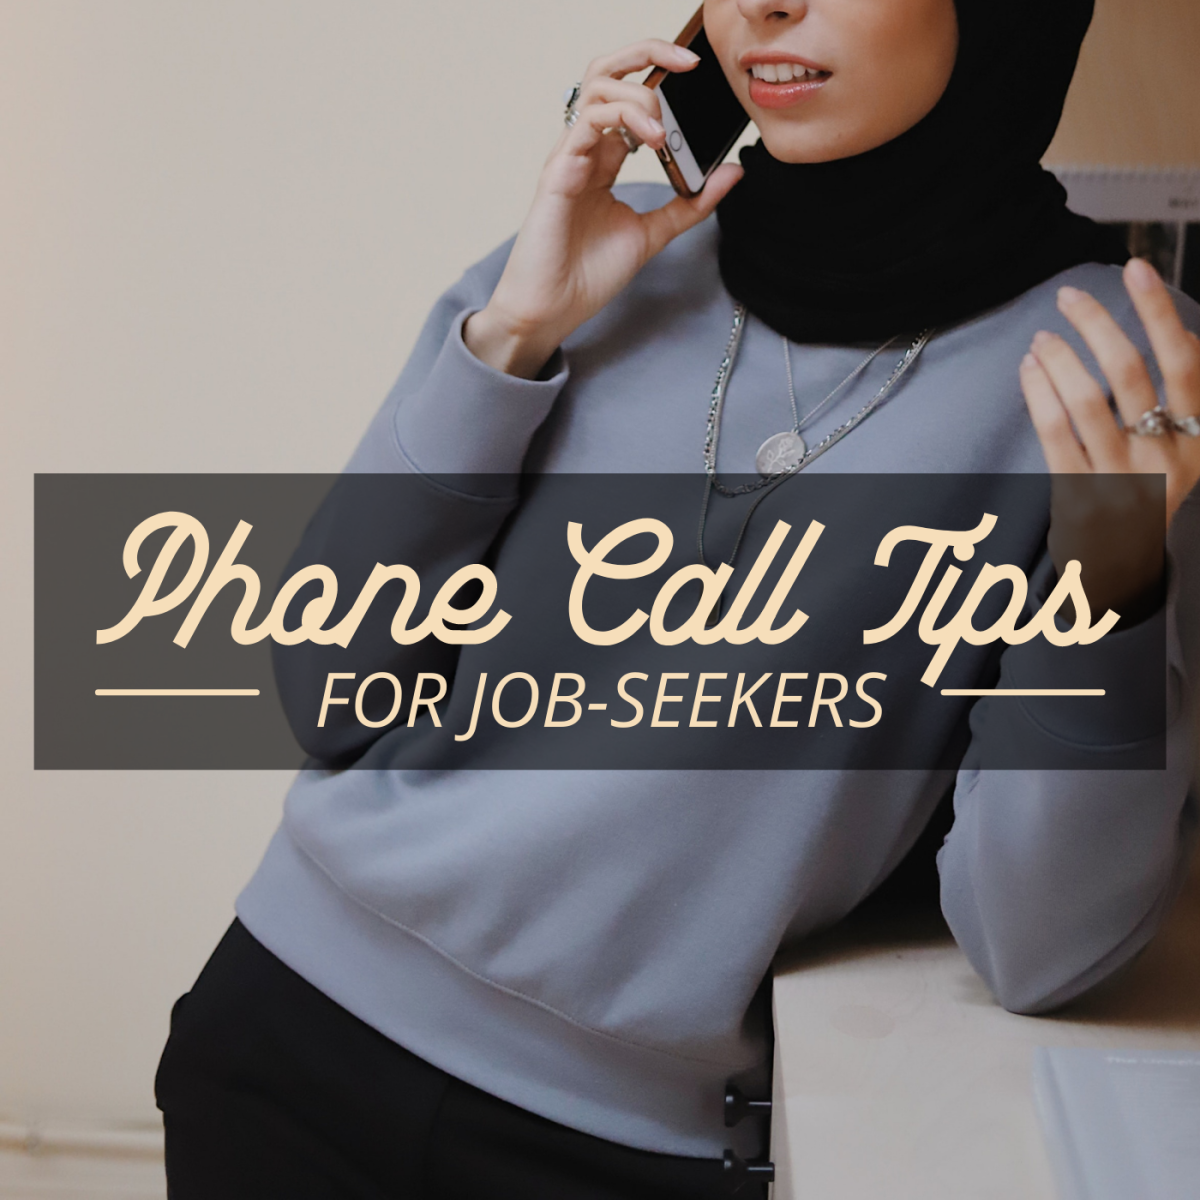 How to Maintain Proper Phone Etiquette While Job Hunting